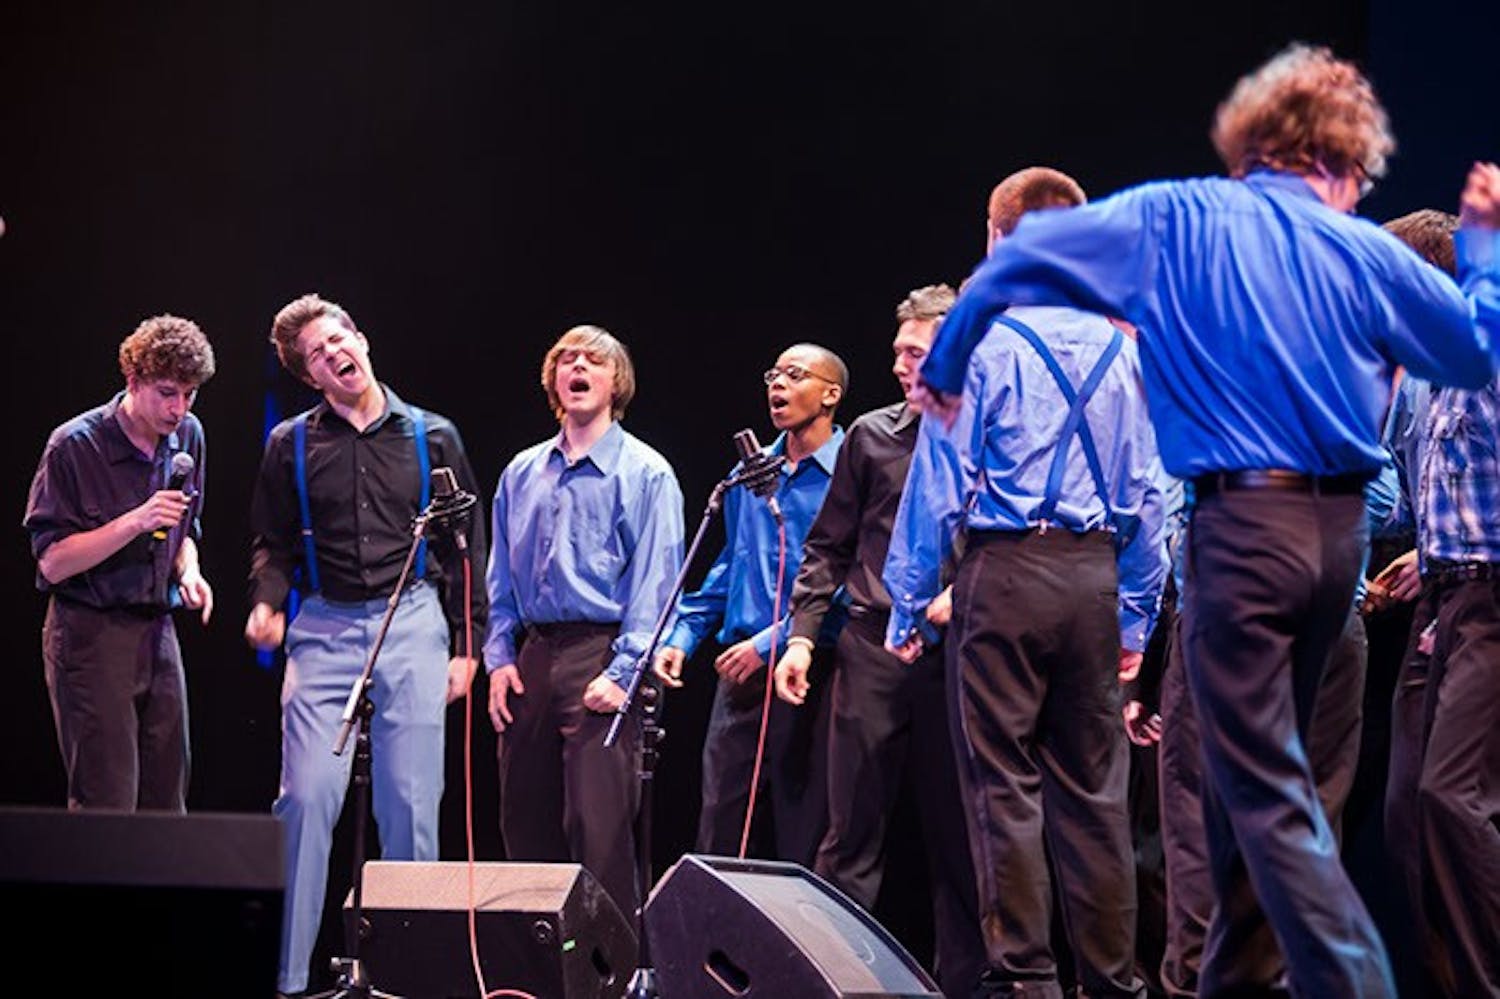 Photos: UW Madhatters sing in their 15th Year